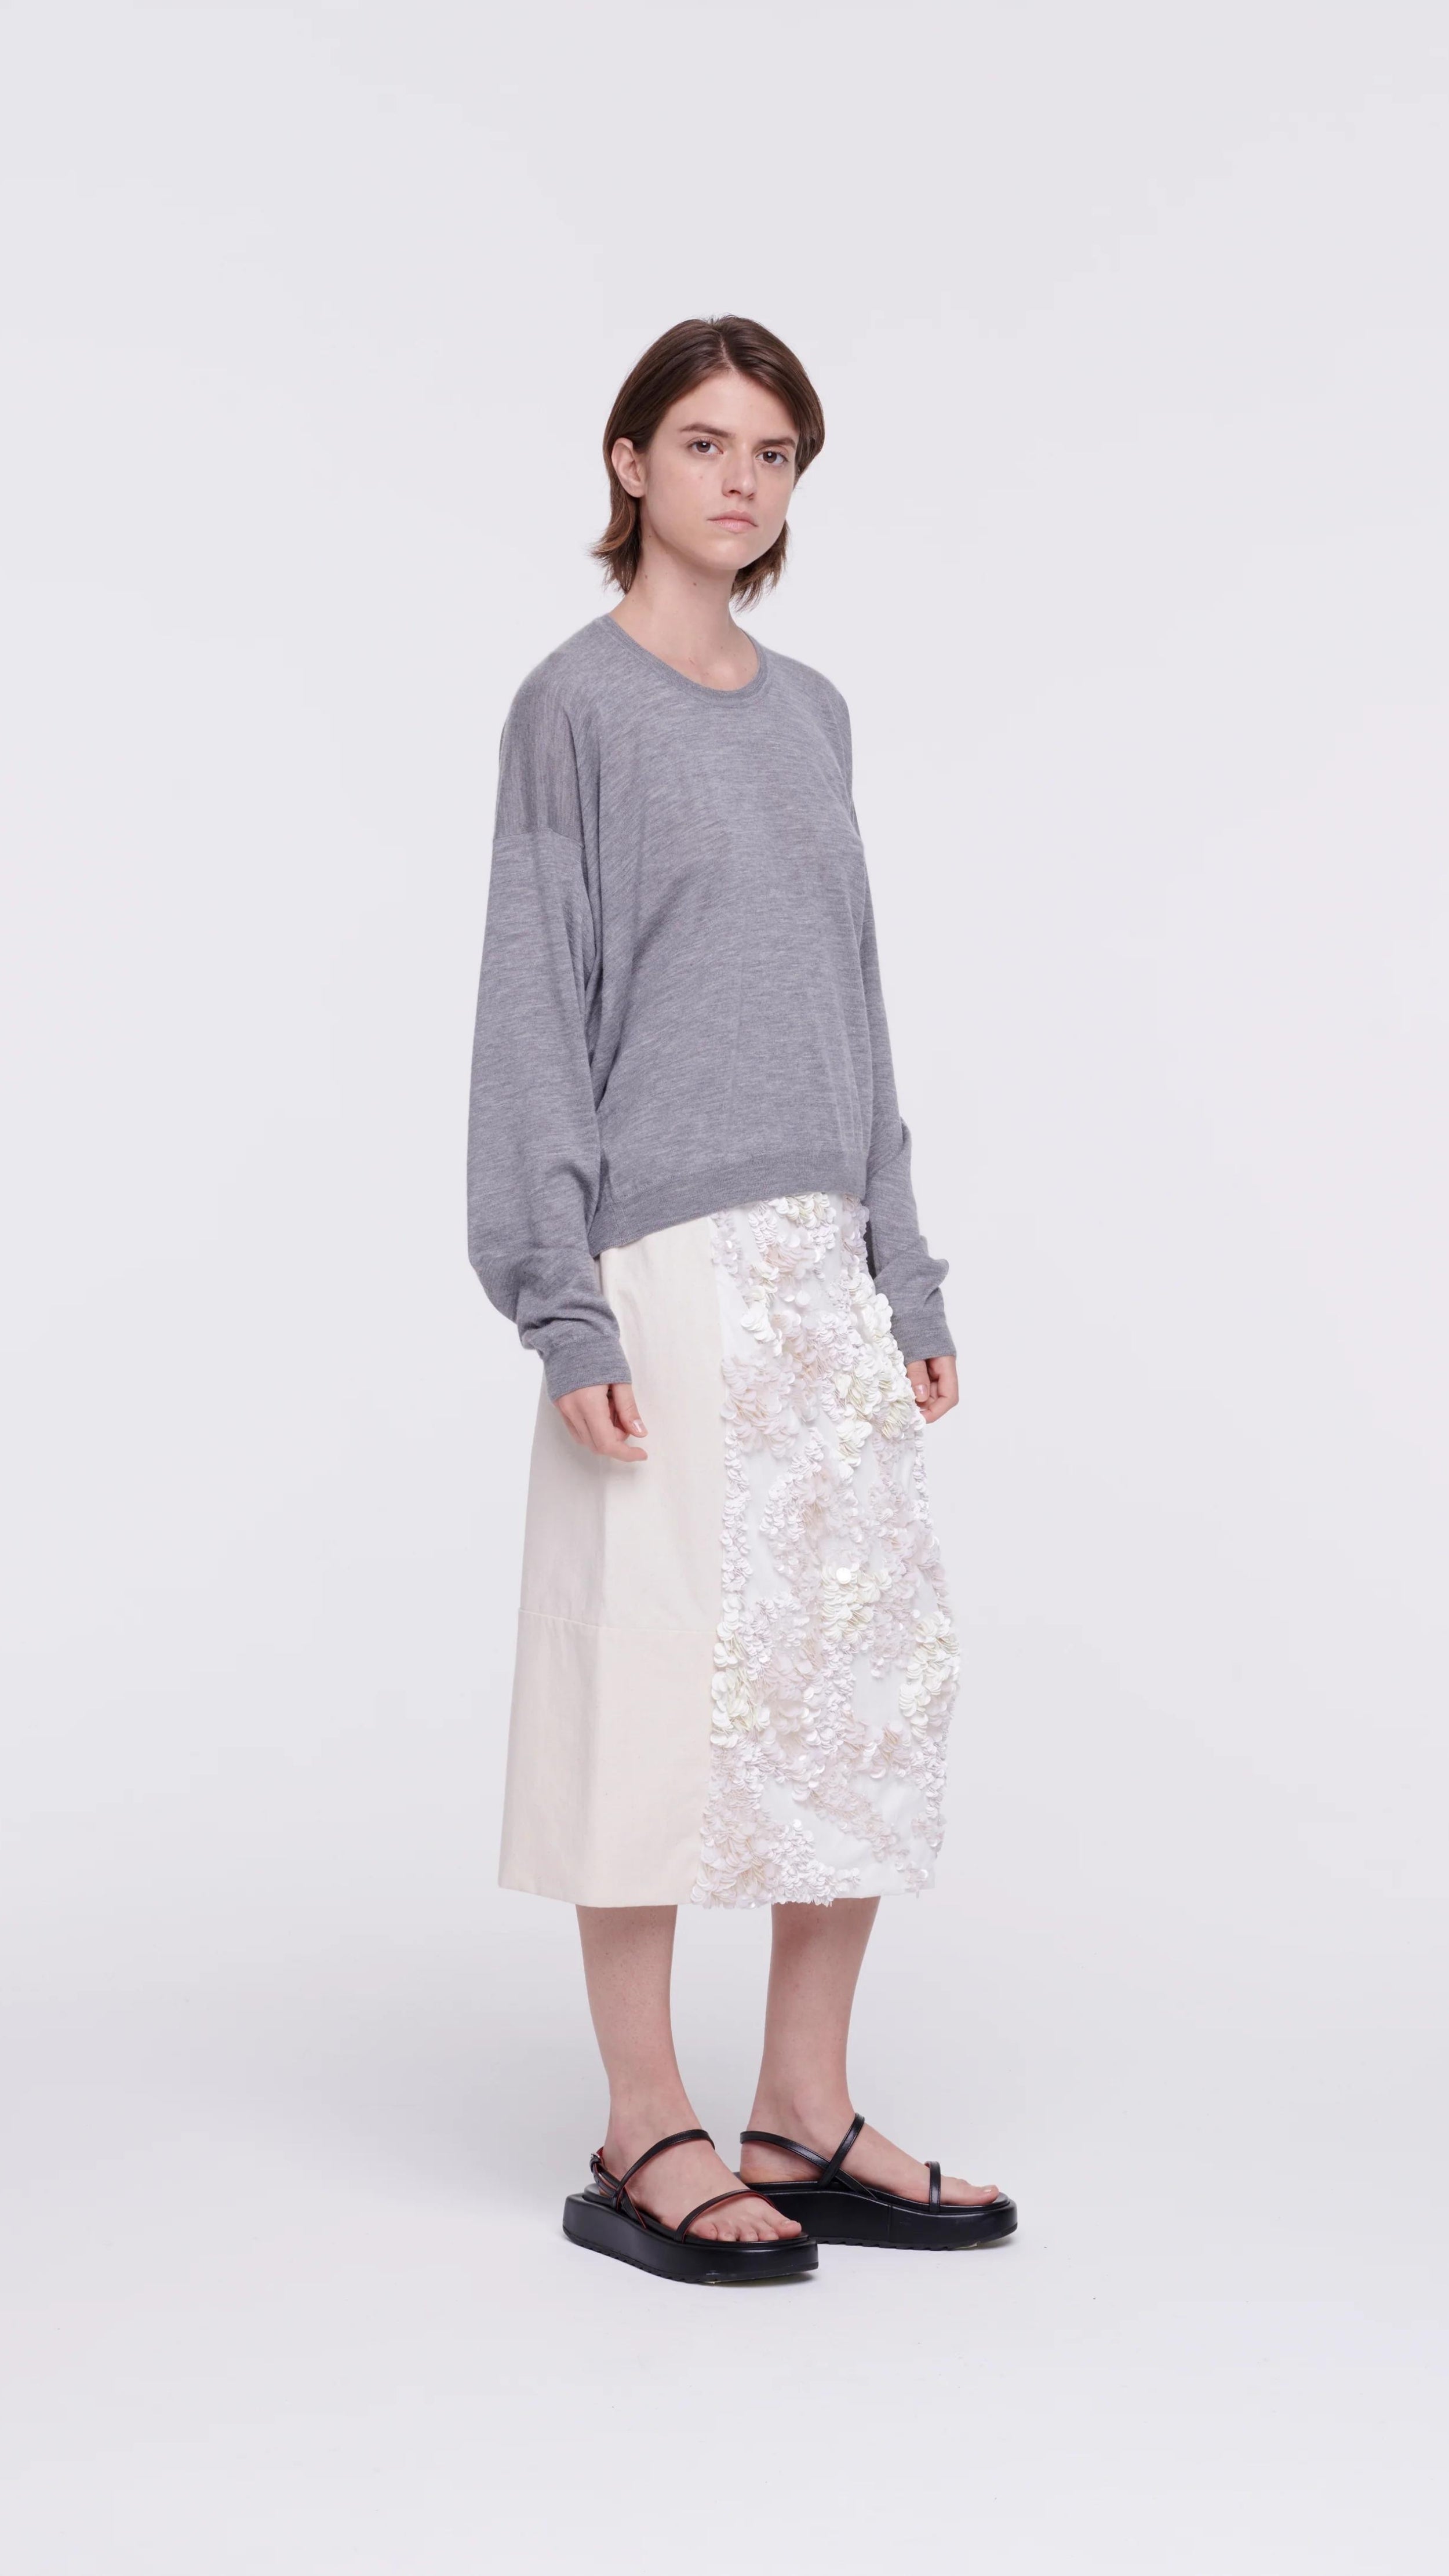 Plan C Panama Sequined Midi Skirt, Cotton panama midi skirt crafted in Italy with front panel of white sequins. This skirt has a contrasting black elastic waistband. The skirt falls to knee length.  Shown on model facing front and to the side